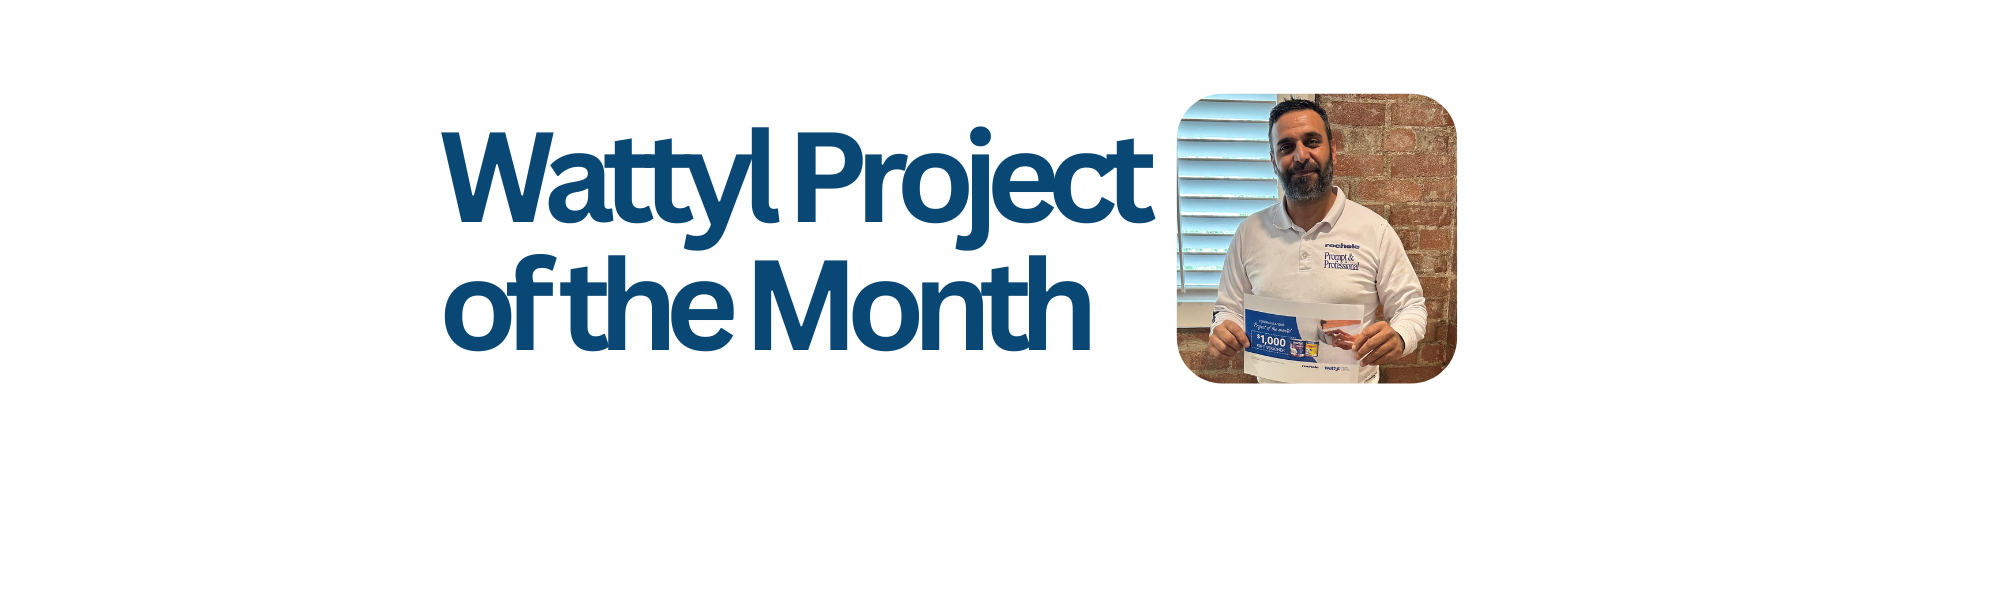 January Wattyl Project of the Month